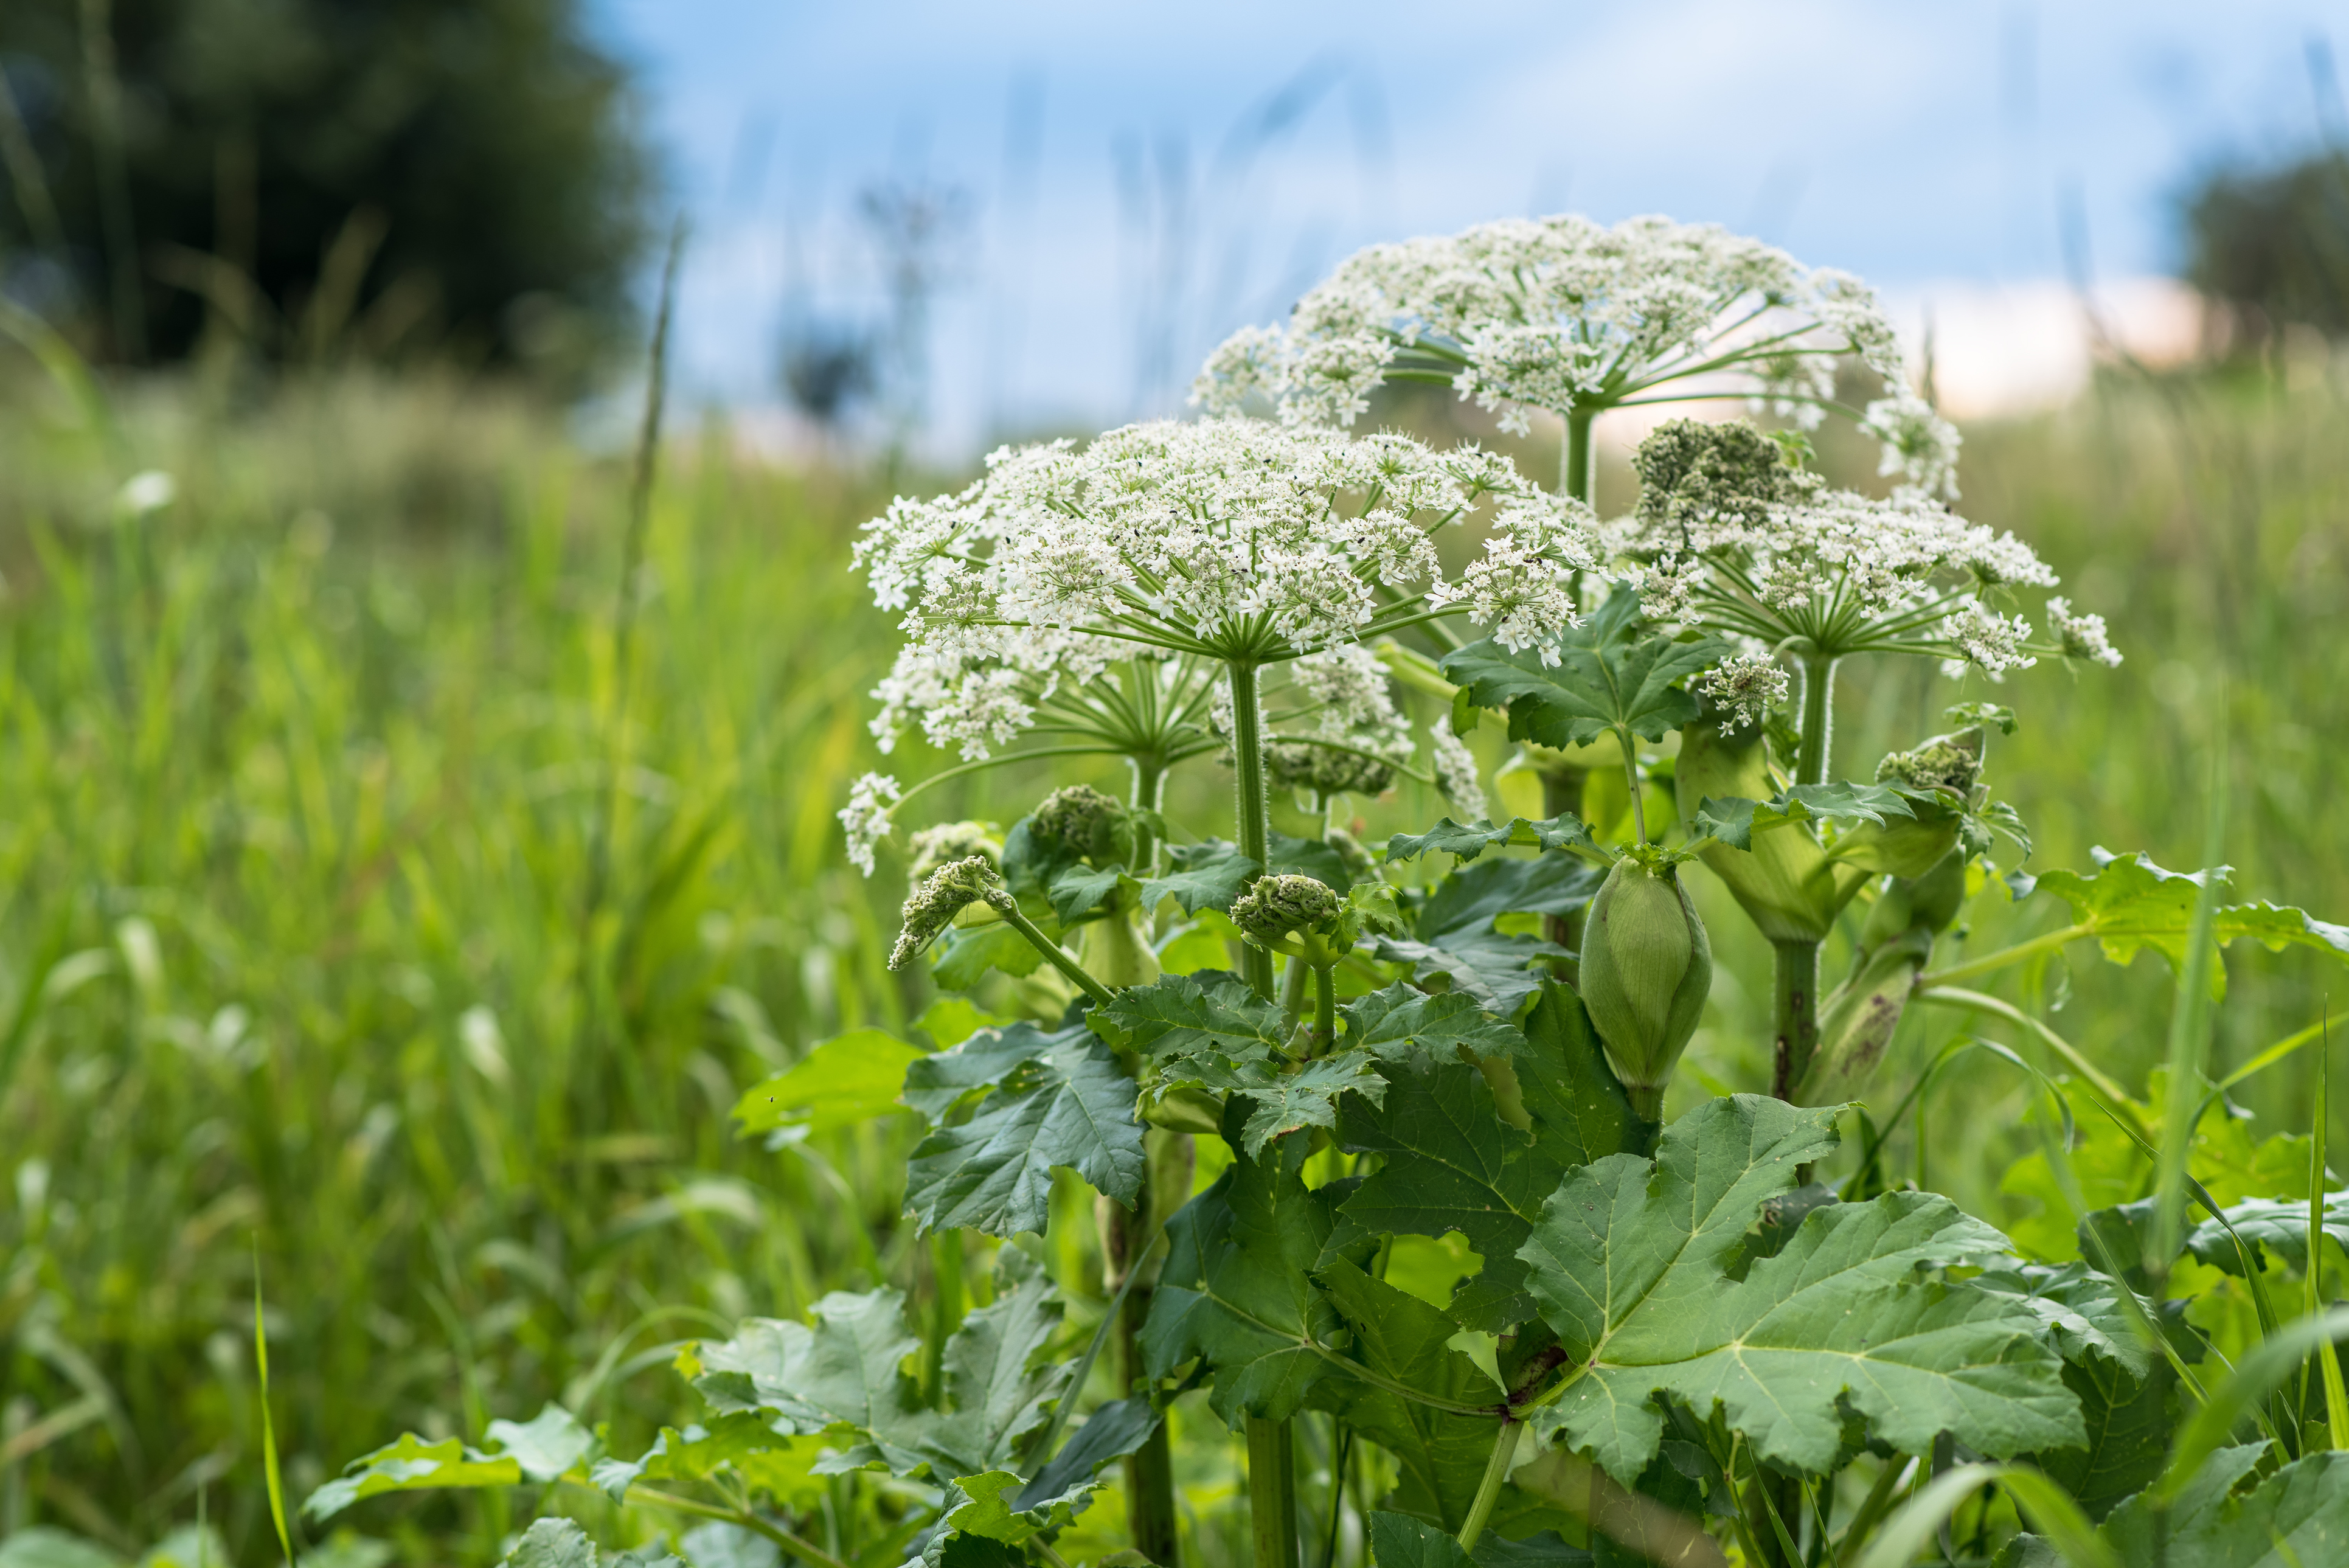 The sap of hogweed causes phytophotodermatitis in humans, resulting in blisters and long-lasting scars.